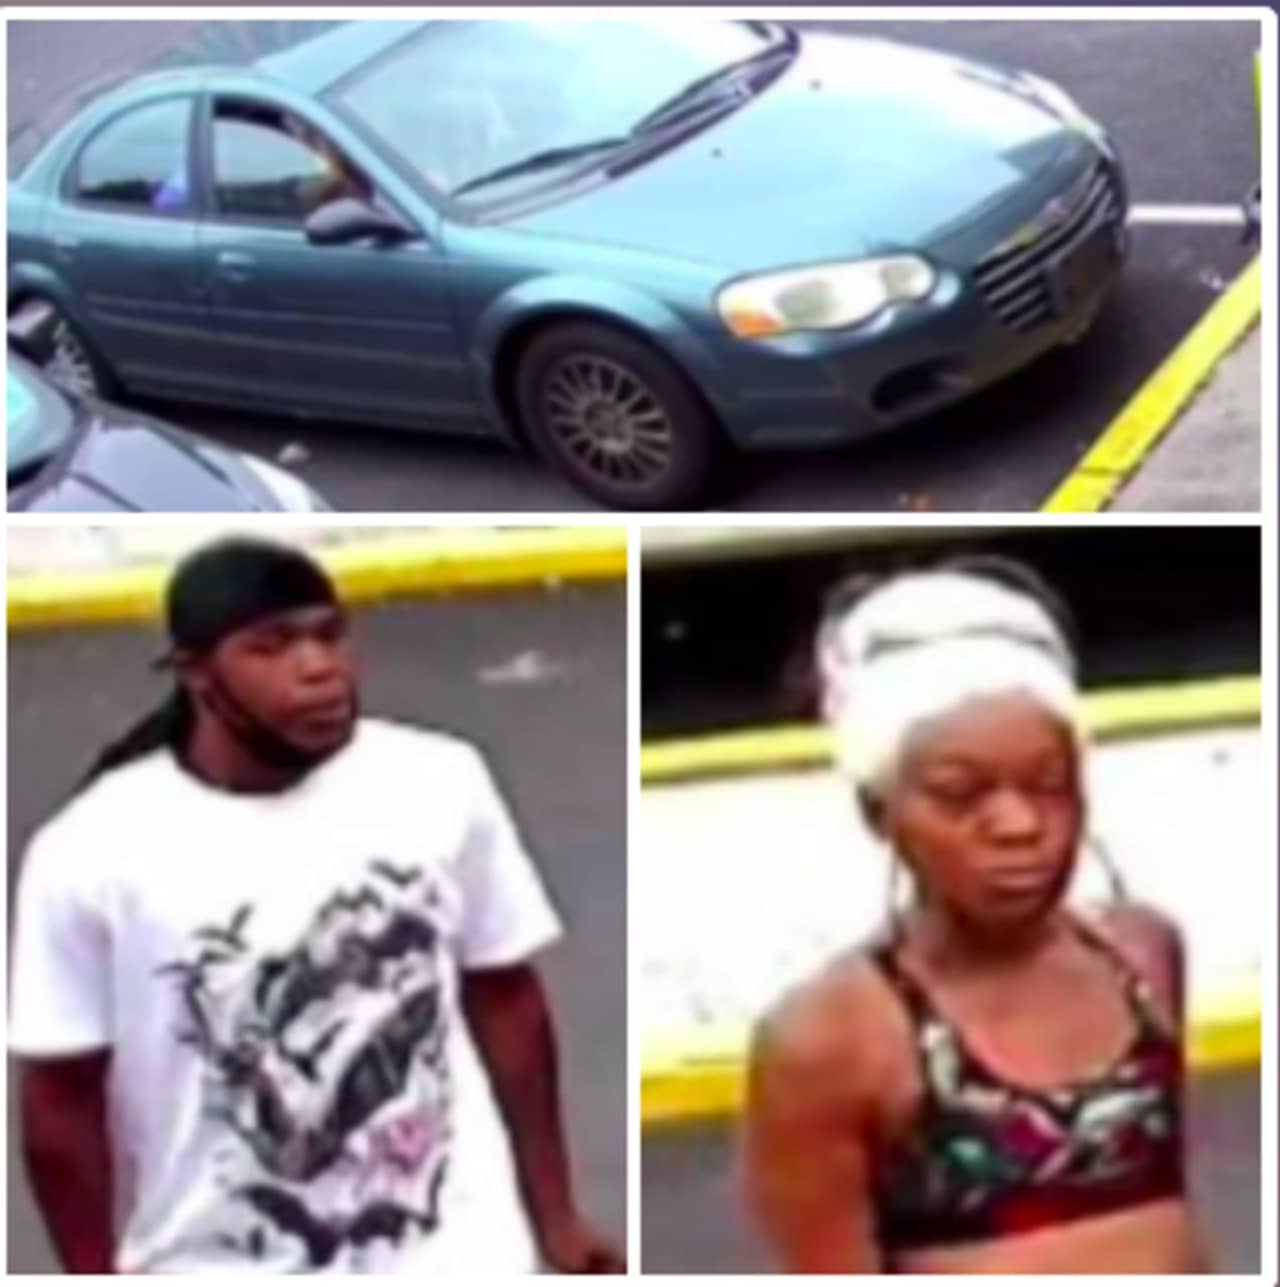 Individuals wanted in Newark shooting investigation